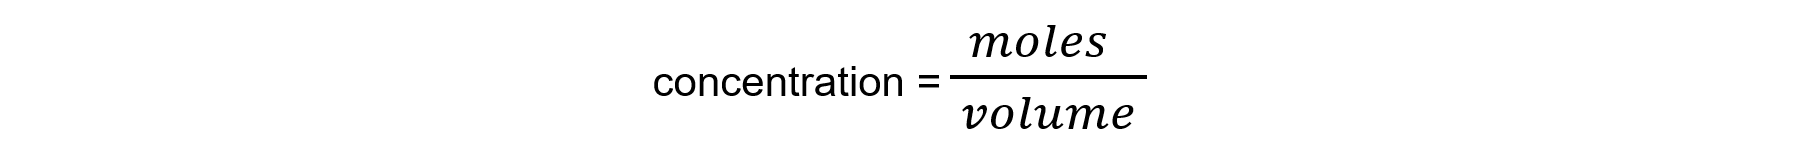 1.2.8-Concentration-calculations-WE-1-workings2